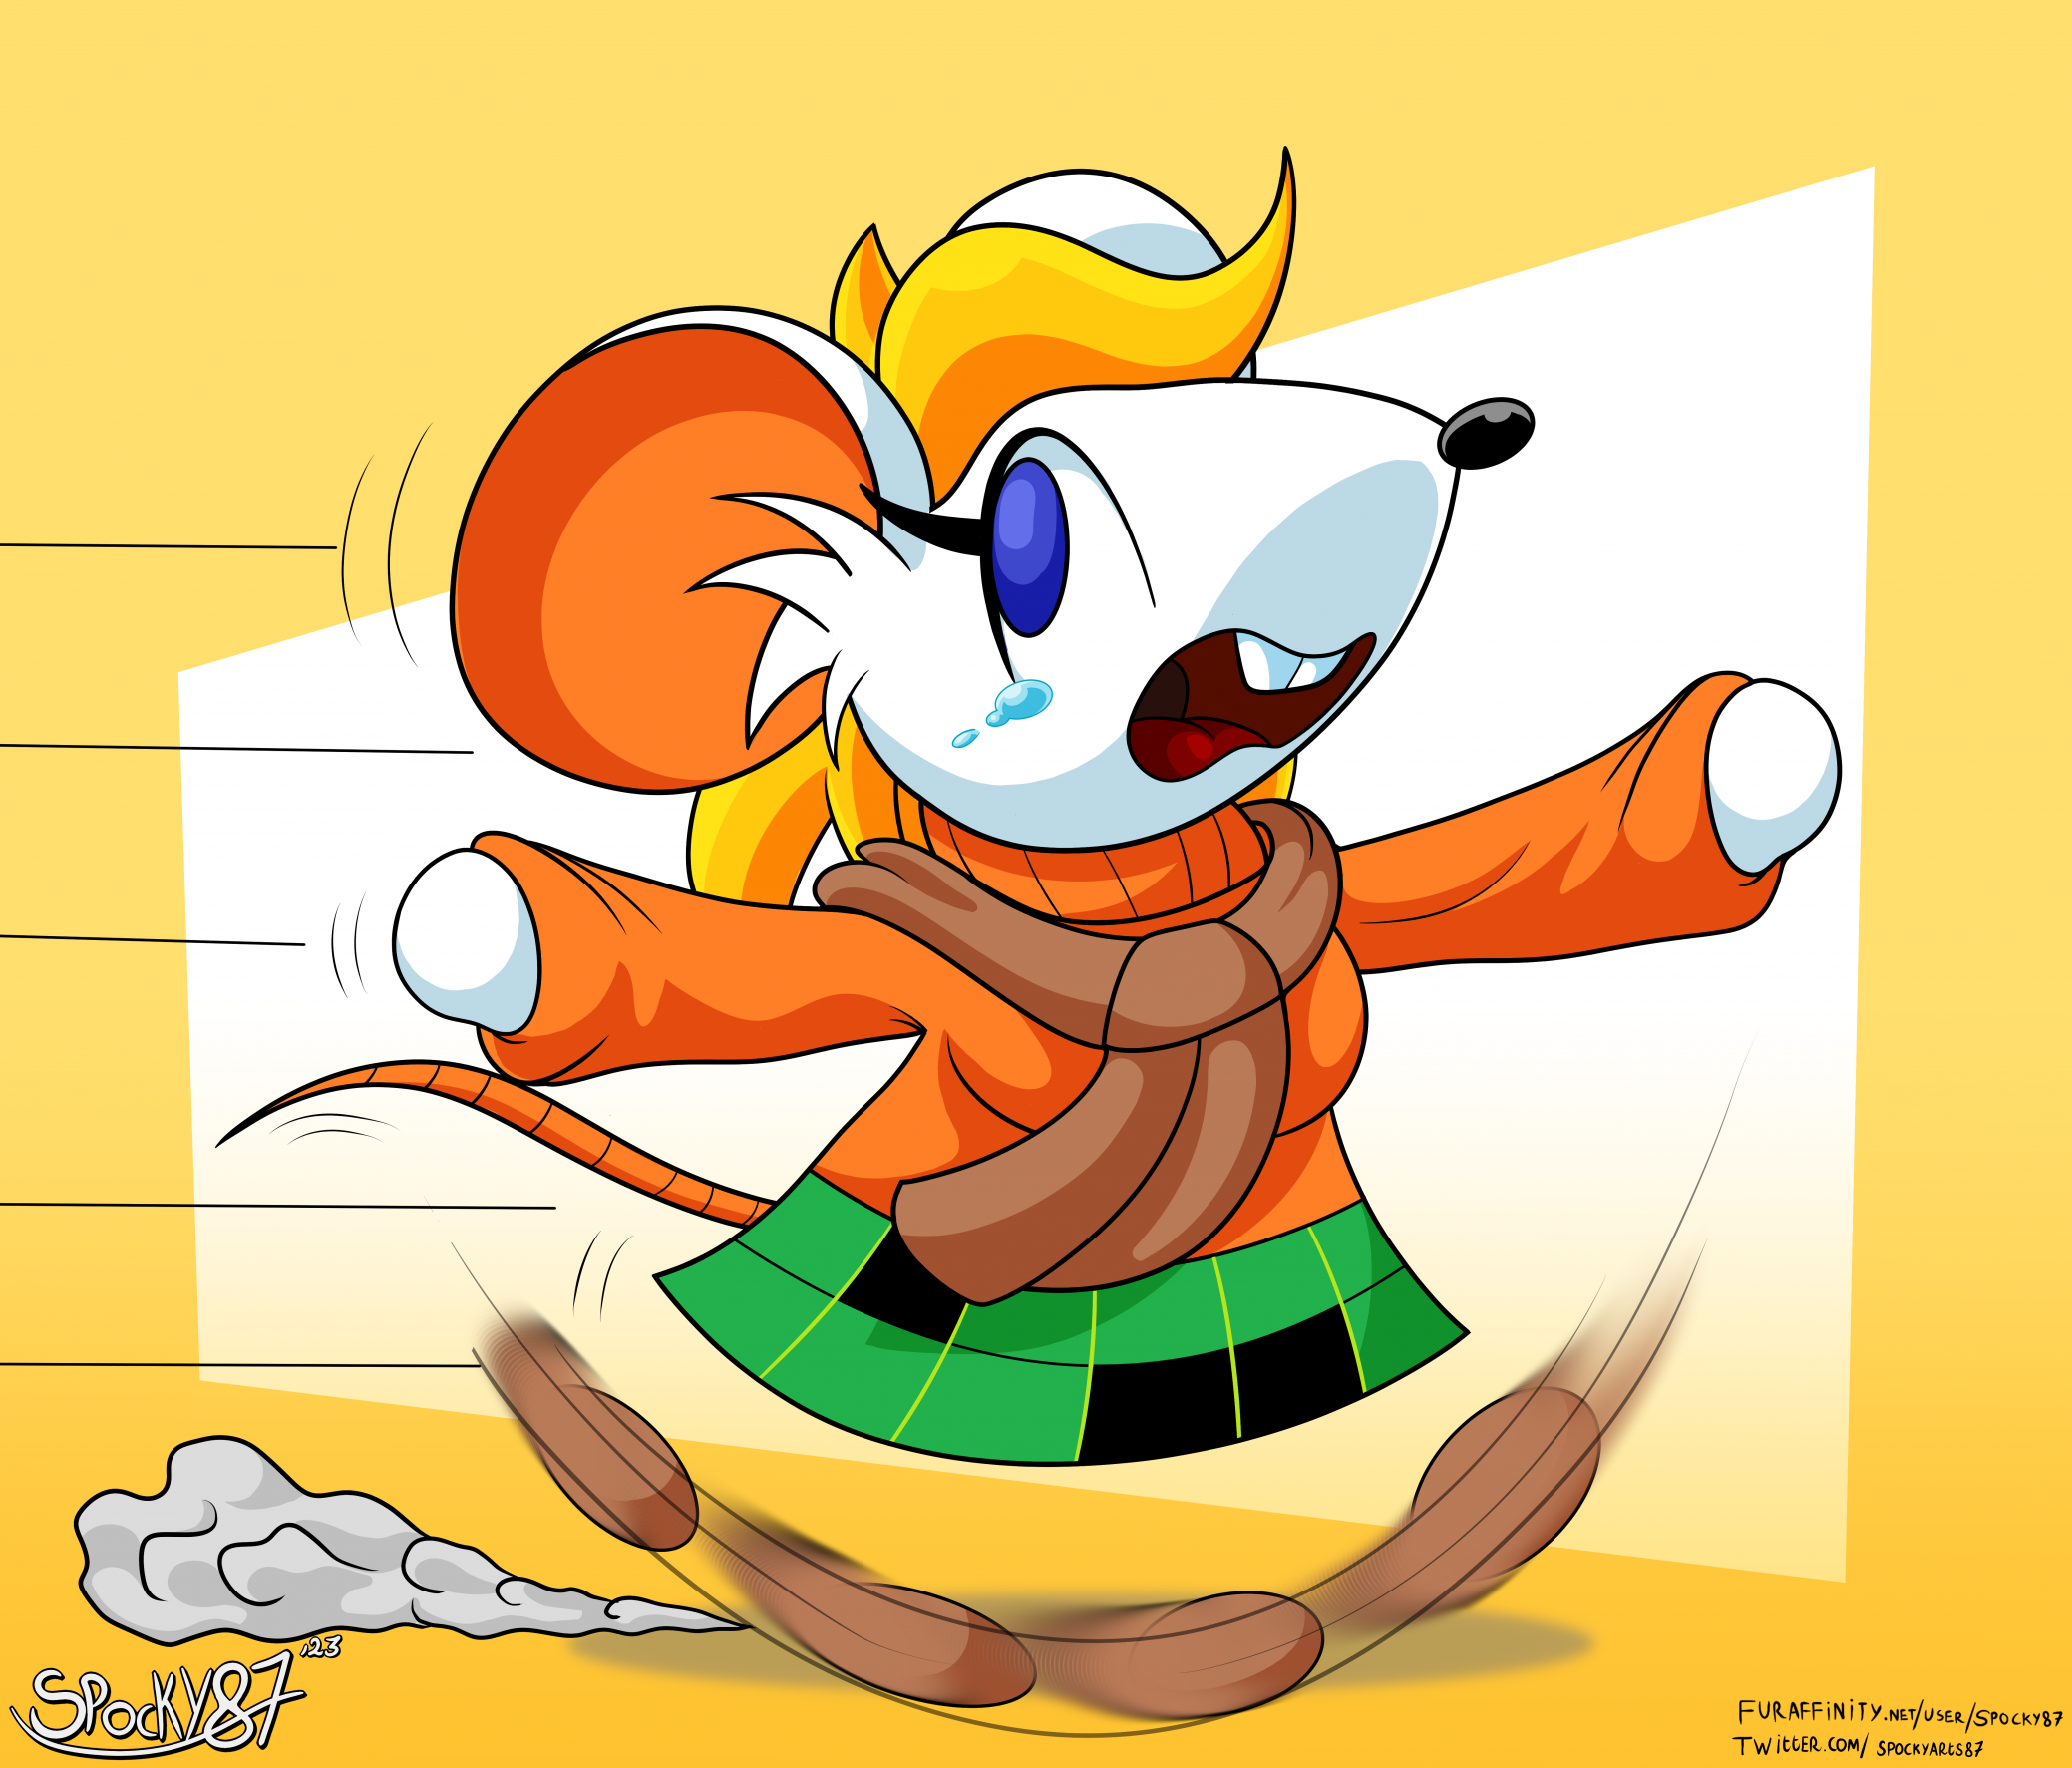 Fenix's Art Blog — What if Ashley was not only a little mouse, but